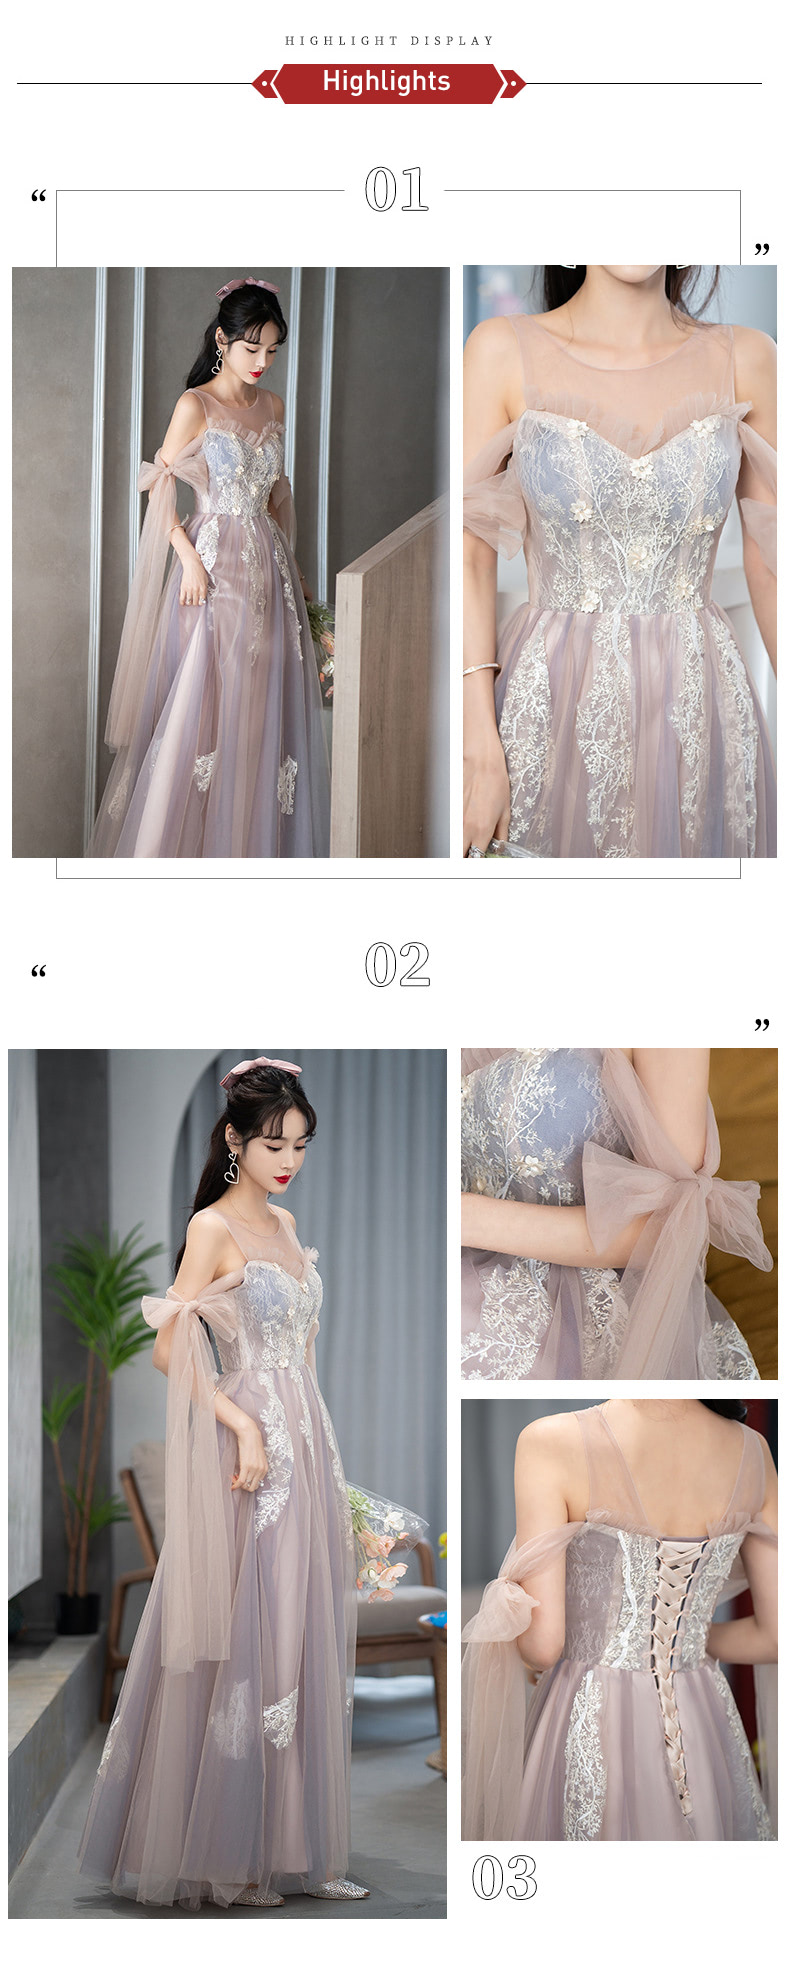 A-Line-Champagne-Purple-Senior-Prom-Dress-Sweet-Ball-Gown09